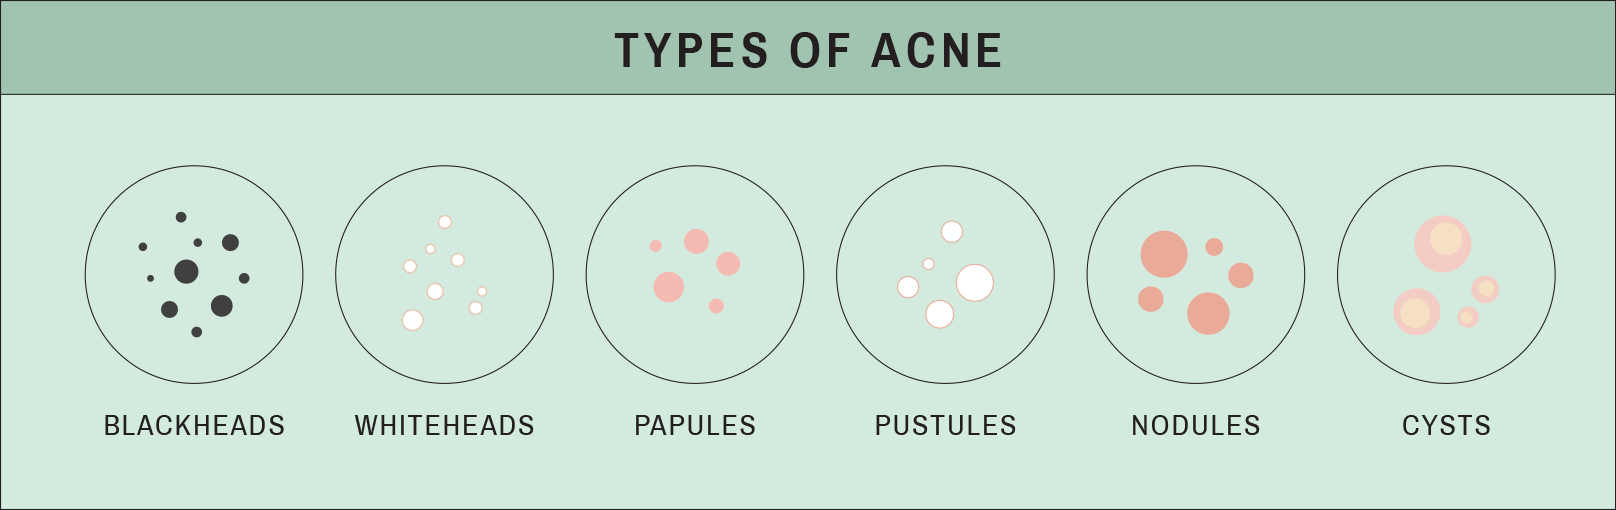 Let's talk about ACNE